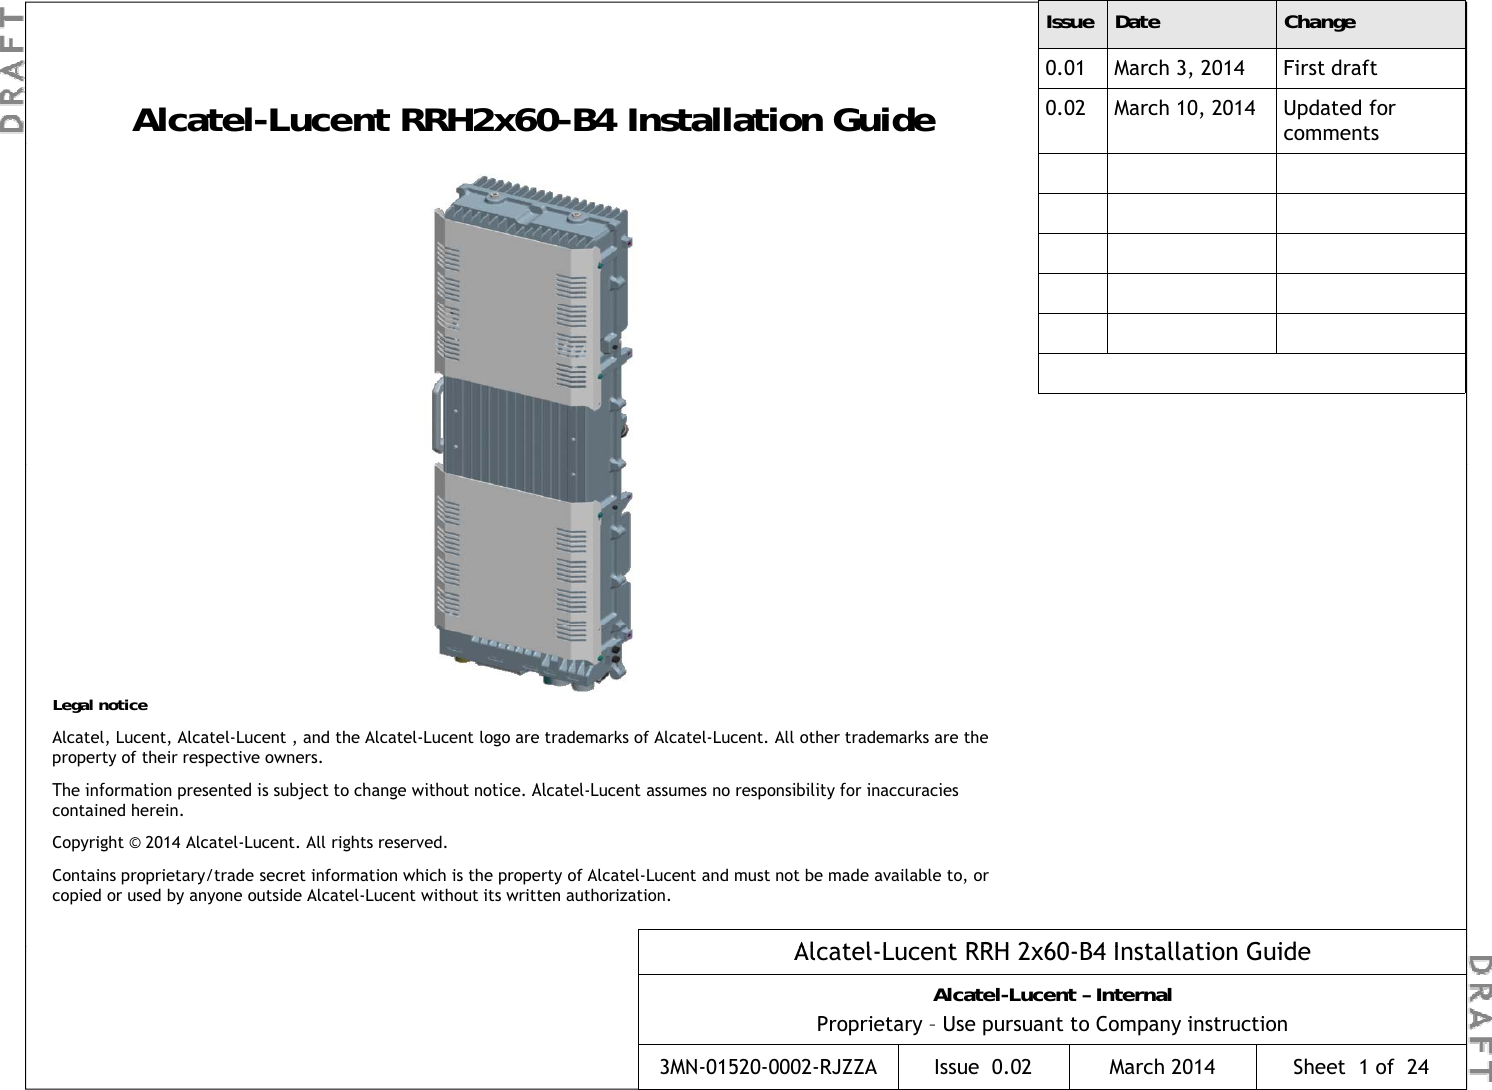 Alcatel-Lucent RRH2x60-B4 Installation GuideIssue Date Change0.01 March 3, 2014 First draft0.02 March 10, 2014 Updated for commentsLegal noticeAlcatel, Lucent, Alcatel-Lucent , and the Alcatel-Lucent logo are trademarks of Alcatel-Lucent. All other trademarks are the property of their respective owners.Th  i f ti   t d i   bj t t   h   ith t  ti  Al t lL t   ibilit  f  ii Al t lL t RRH 2 60B4 I t ll ti  G idThe information presented is subject to change without notice. Alcatel-Lucent assumes no responsibility for inaccuracies contained herein.Copyright © 2014 Alcatel-Lucent. All rights reserved.Contains proprietary/trade secret information which is the property of Alcatel-Lucent and must not be made available to, or copied or used by anyone outside Alcatel-Lucent without its written authorization.Alcatel-Lucent RRH 2x60-B4Alcatel-Lucent – InternalProprietary – Use pursuant to Company instruction3MN-01520-0002-RJZZA Issue 0.02 March 2014CAlcatel-Lucent RRH 2x60-B4 Installation GuideAlcatel-Lucent – InternalProprietary – Use pursuant to Company instruction3MN-01520-0002-RJZZA Issue  0.02 March 2014 Sheet  1 of  24